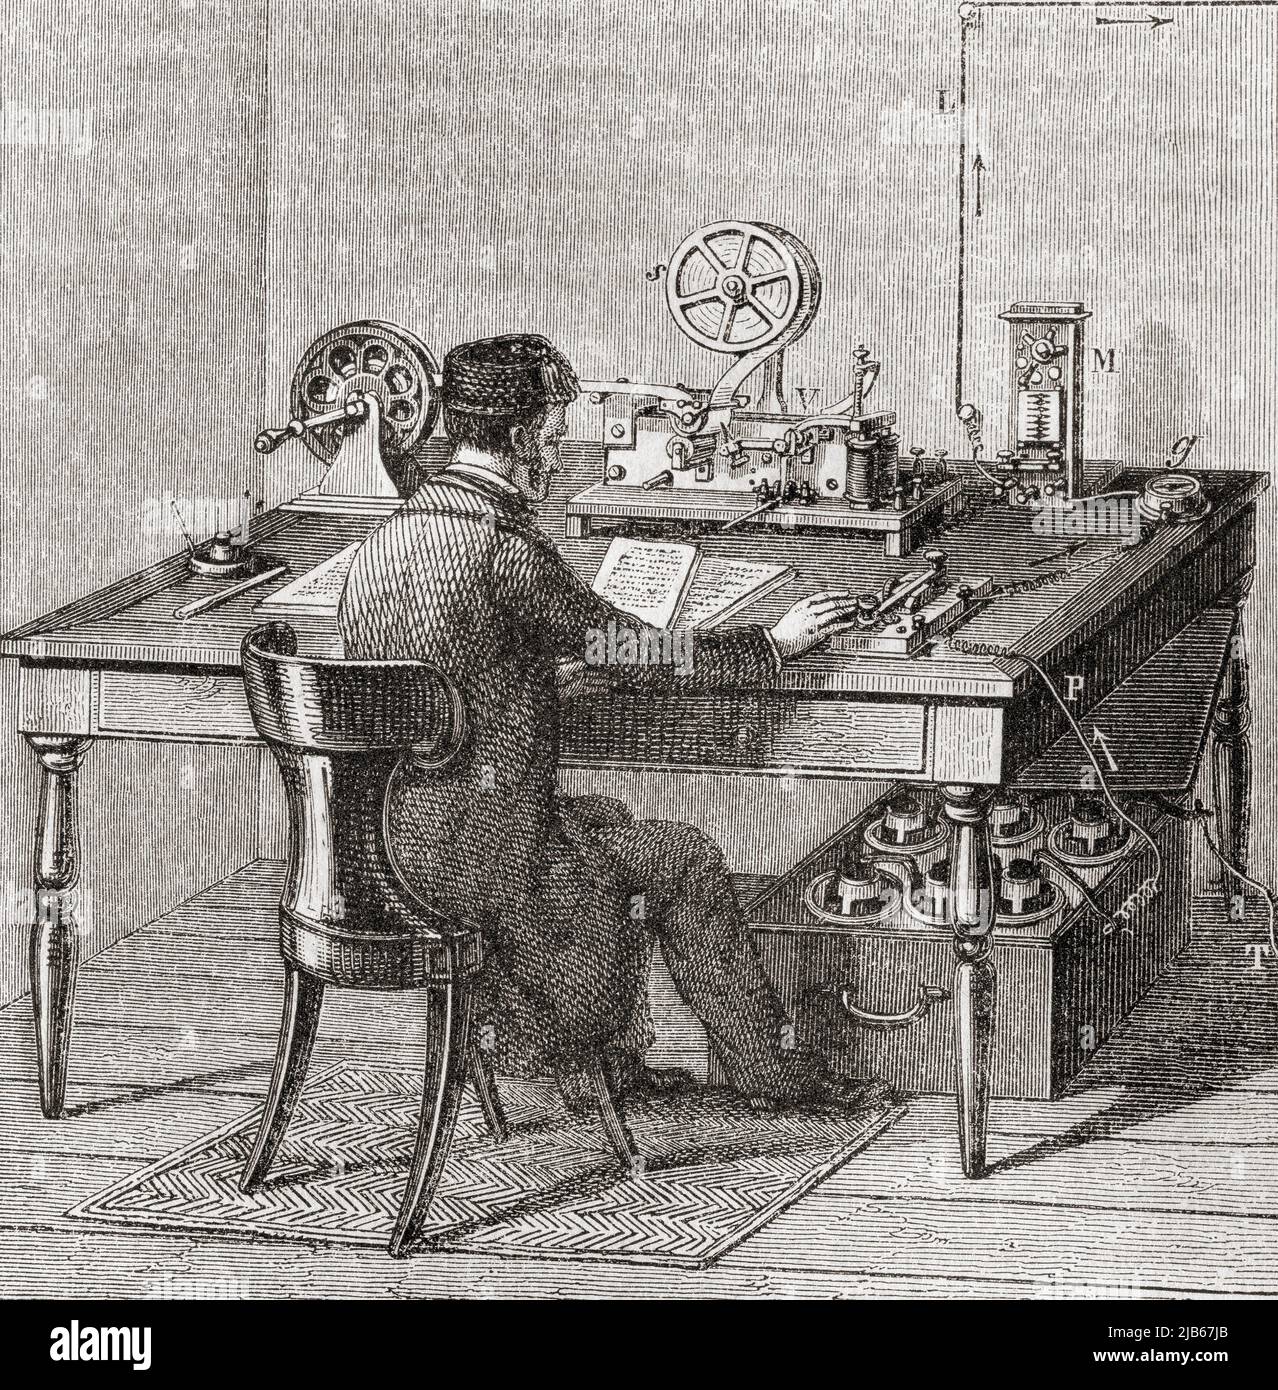 Telegraph office worker forwarding a message in Morse Code, 19th century. From L'Univers Illustre, published Paris, 1859. Stock Photo